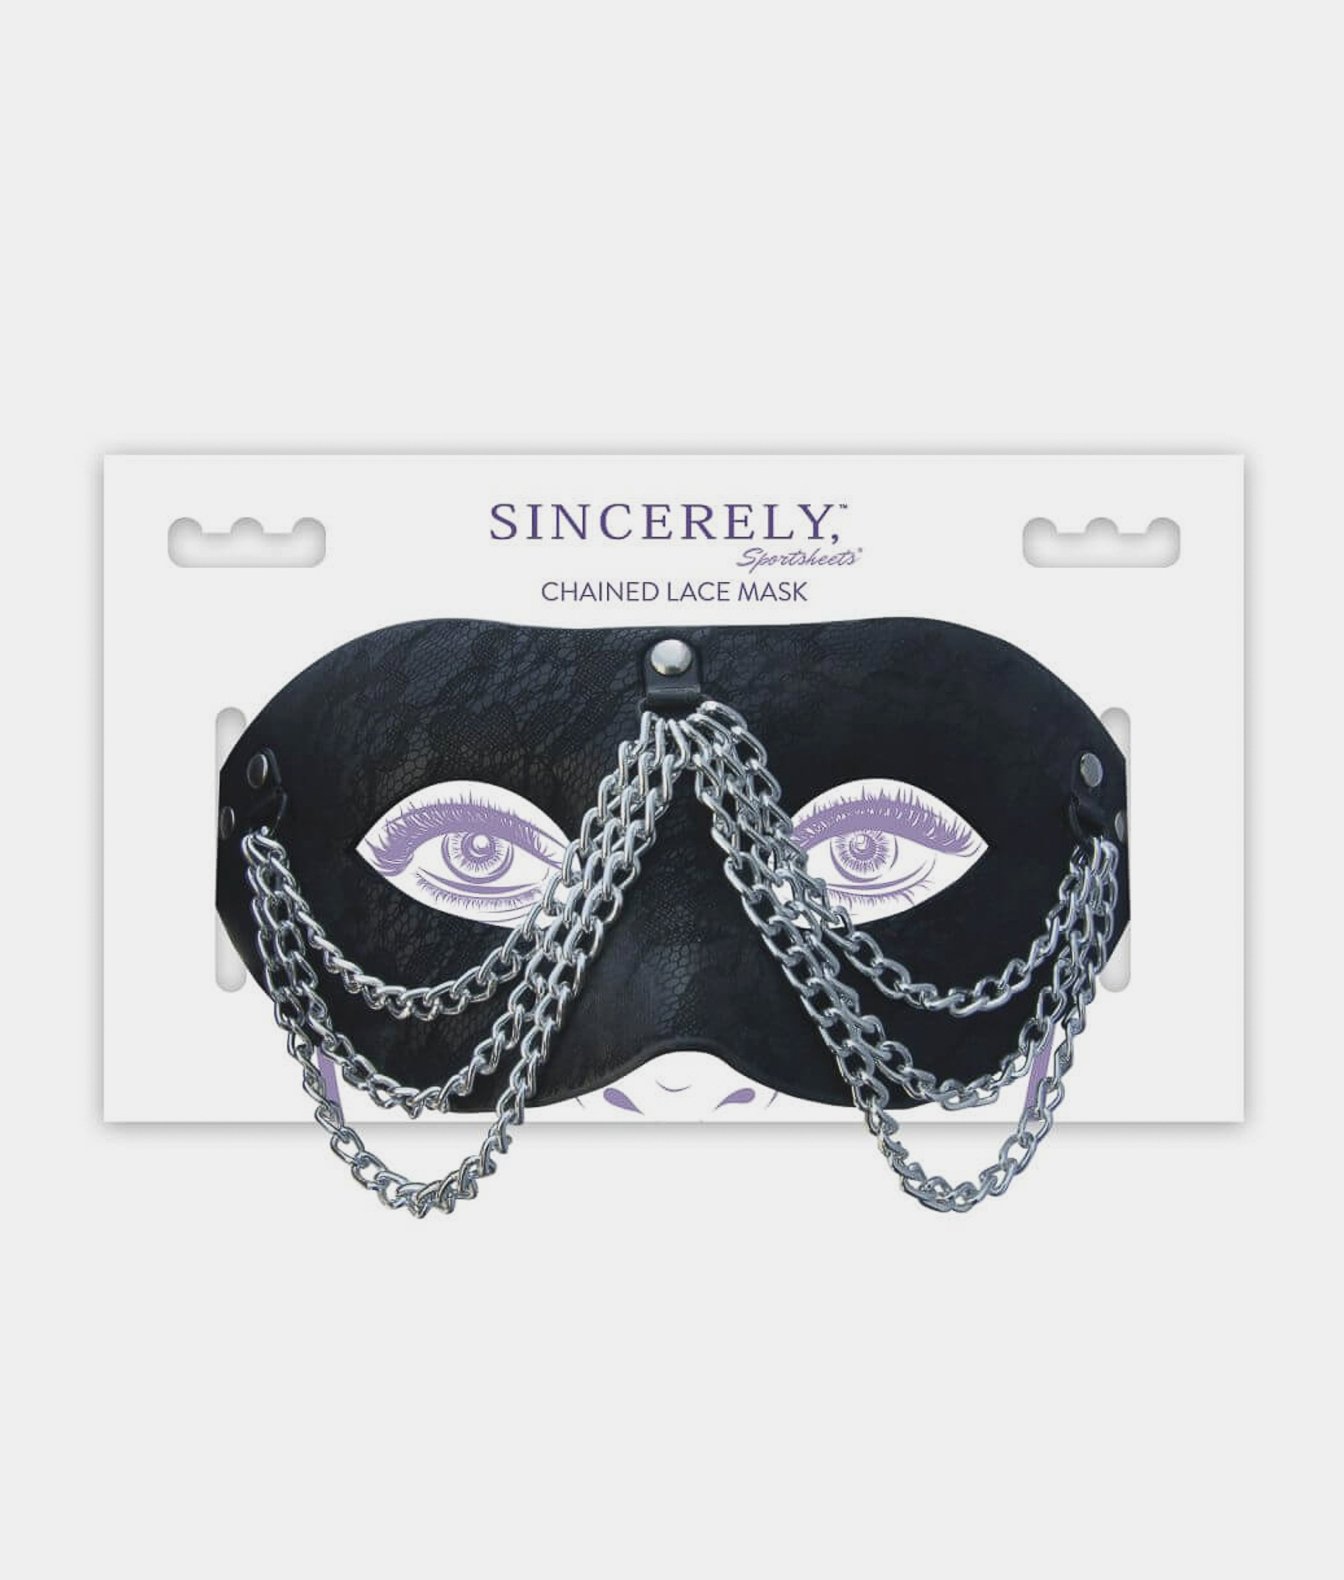 Sportsheets Sincerely Chained Lace Mask maska na oczy